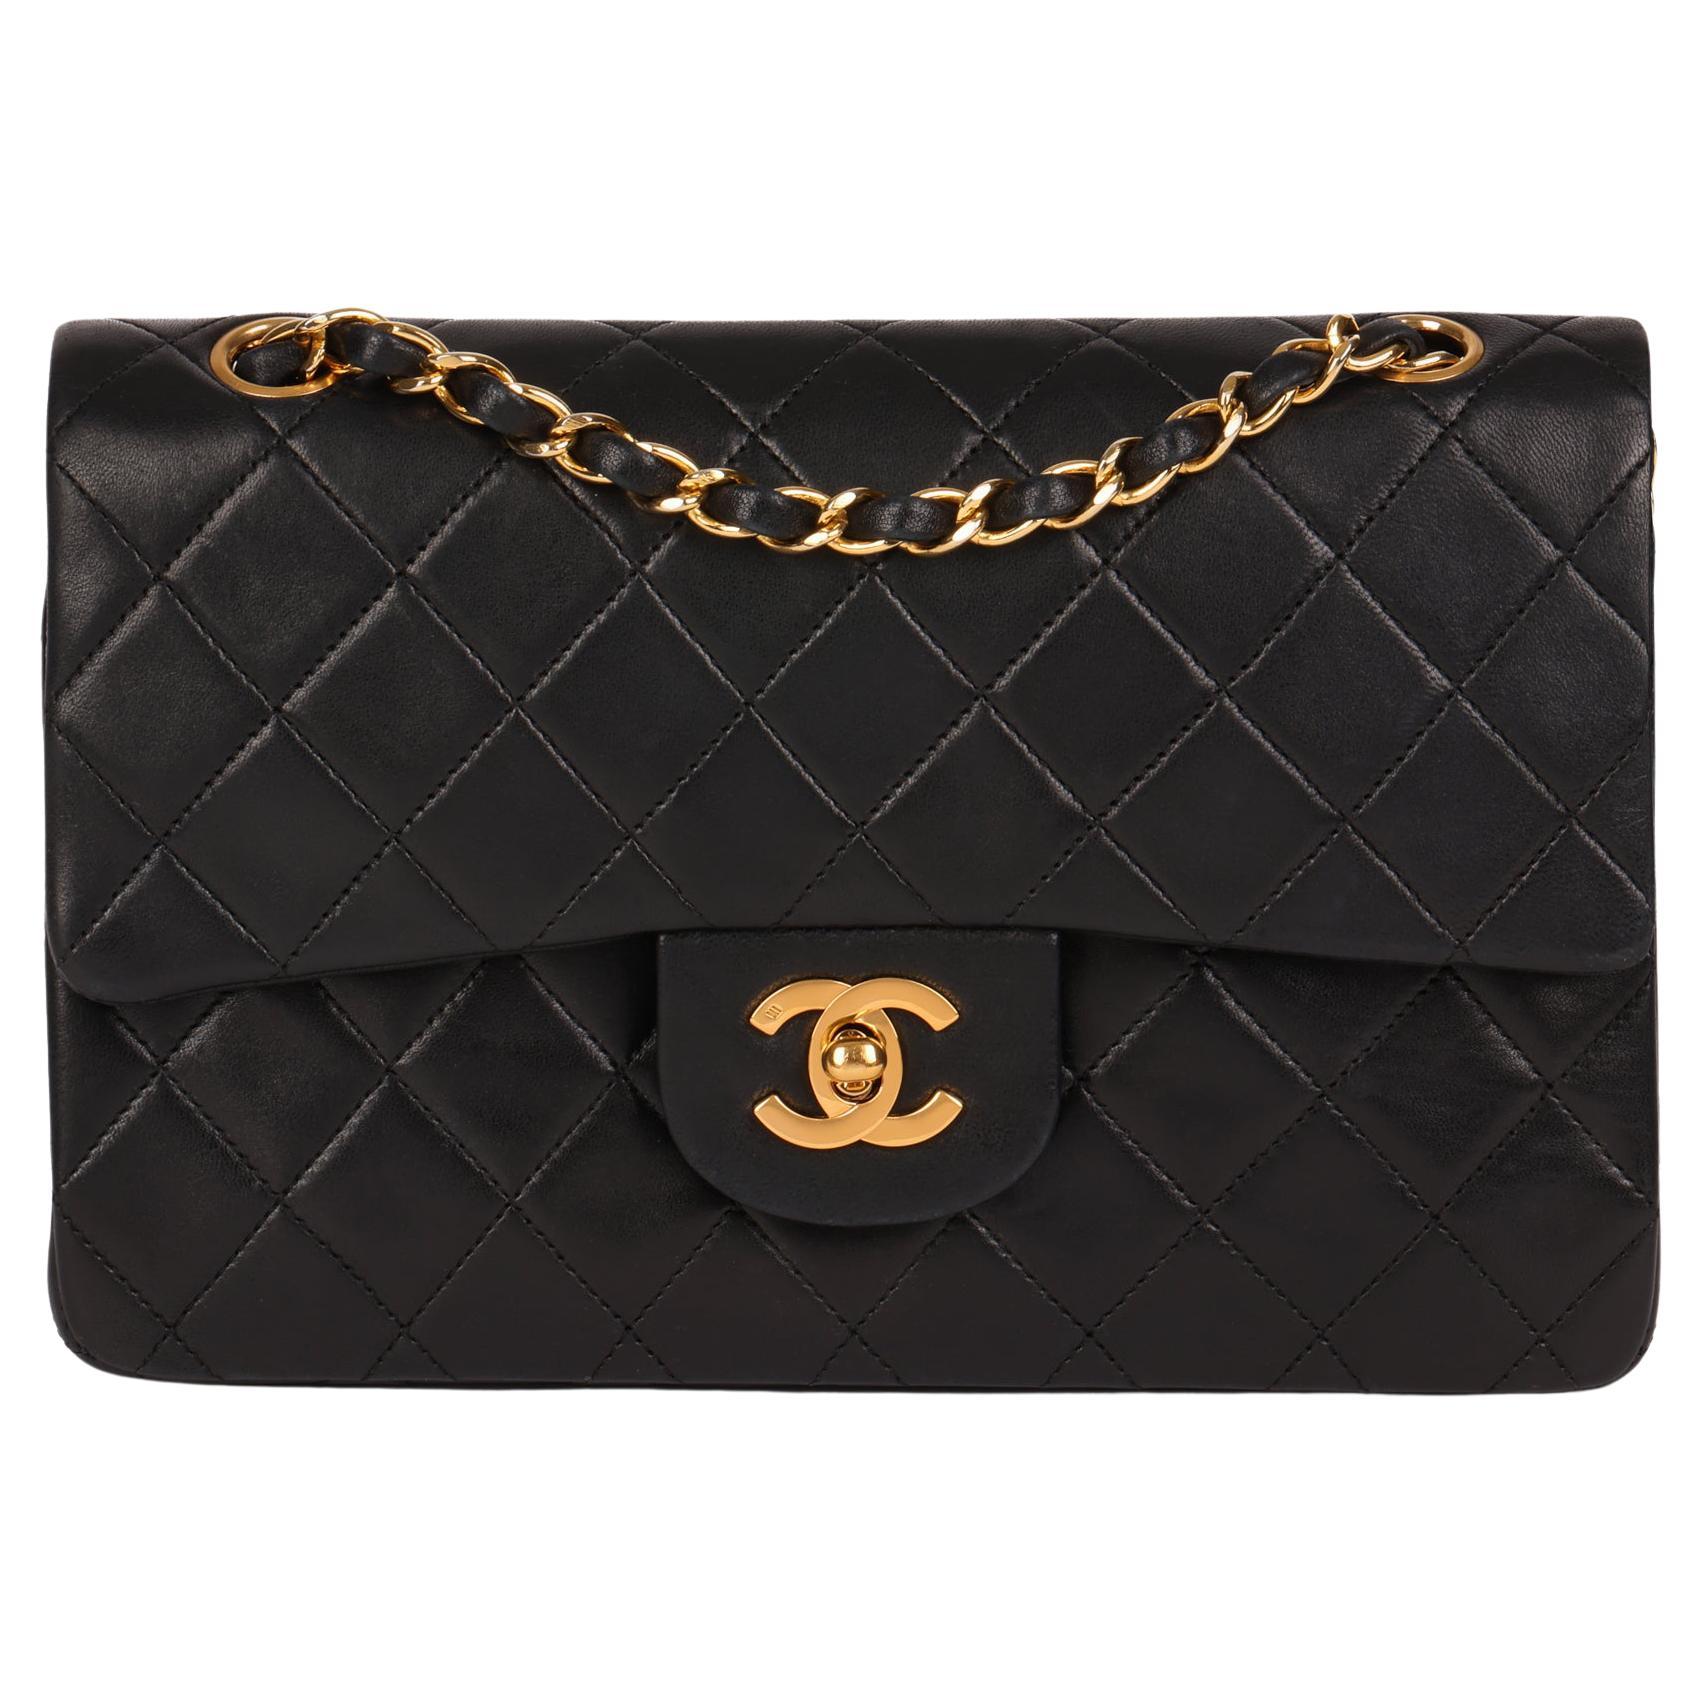 CHANEL SUPER LARGE 2.55 REISSUE BLACK QUILTED PATENT LEATHER FLAP